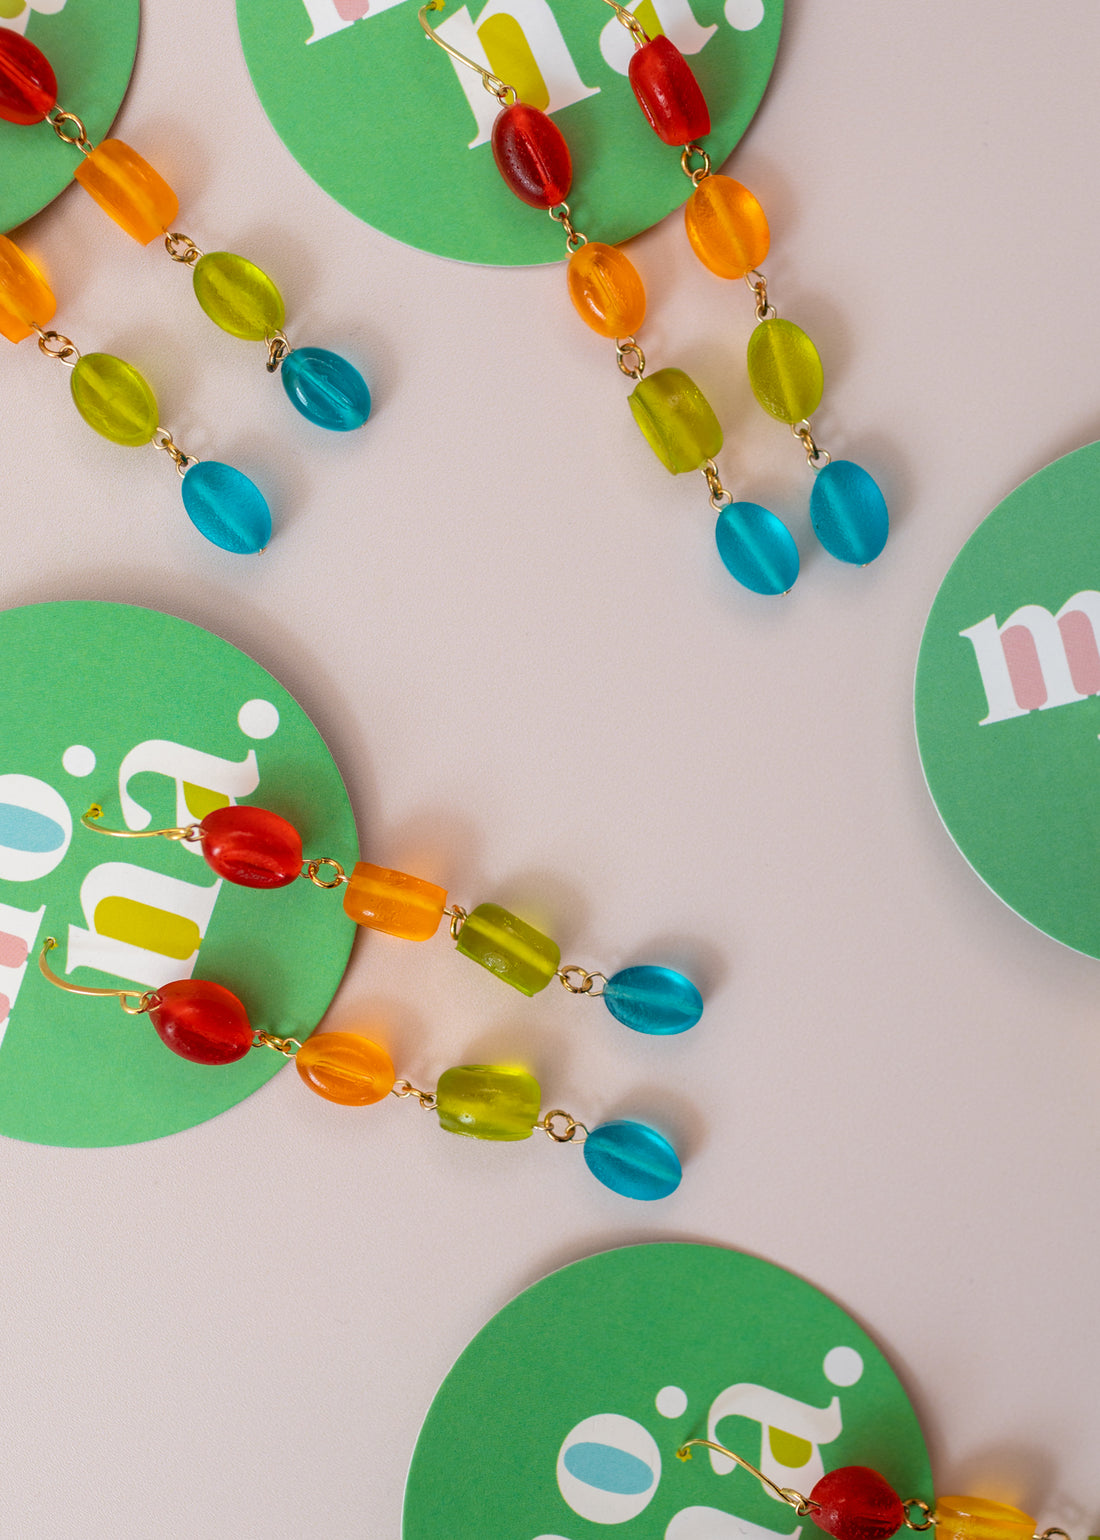 flatlay of multiple, dangly earrings on a green card. Earrings have four beads colored red, orange, green and blue